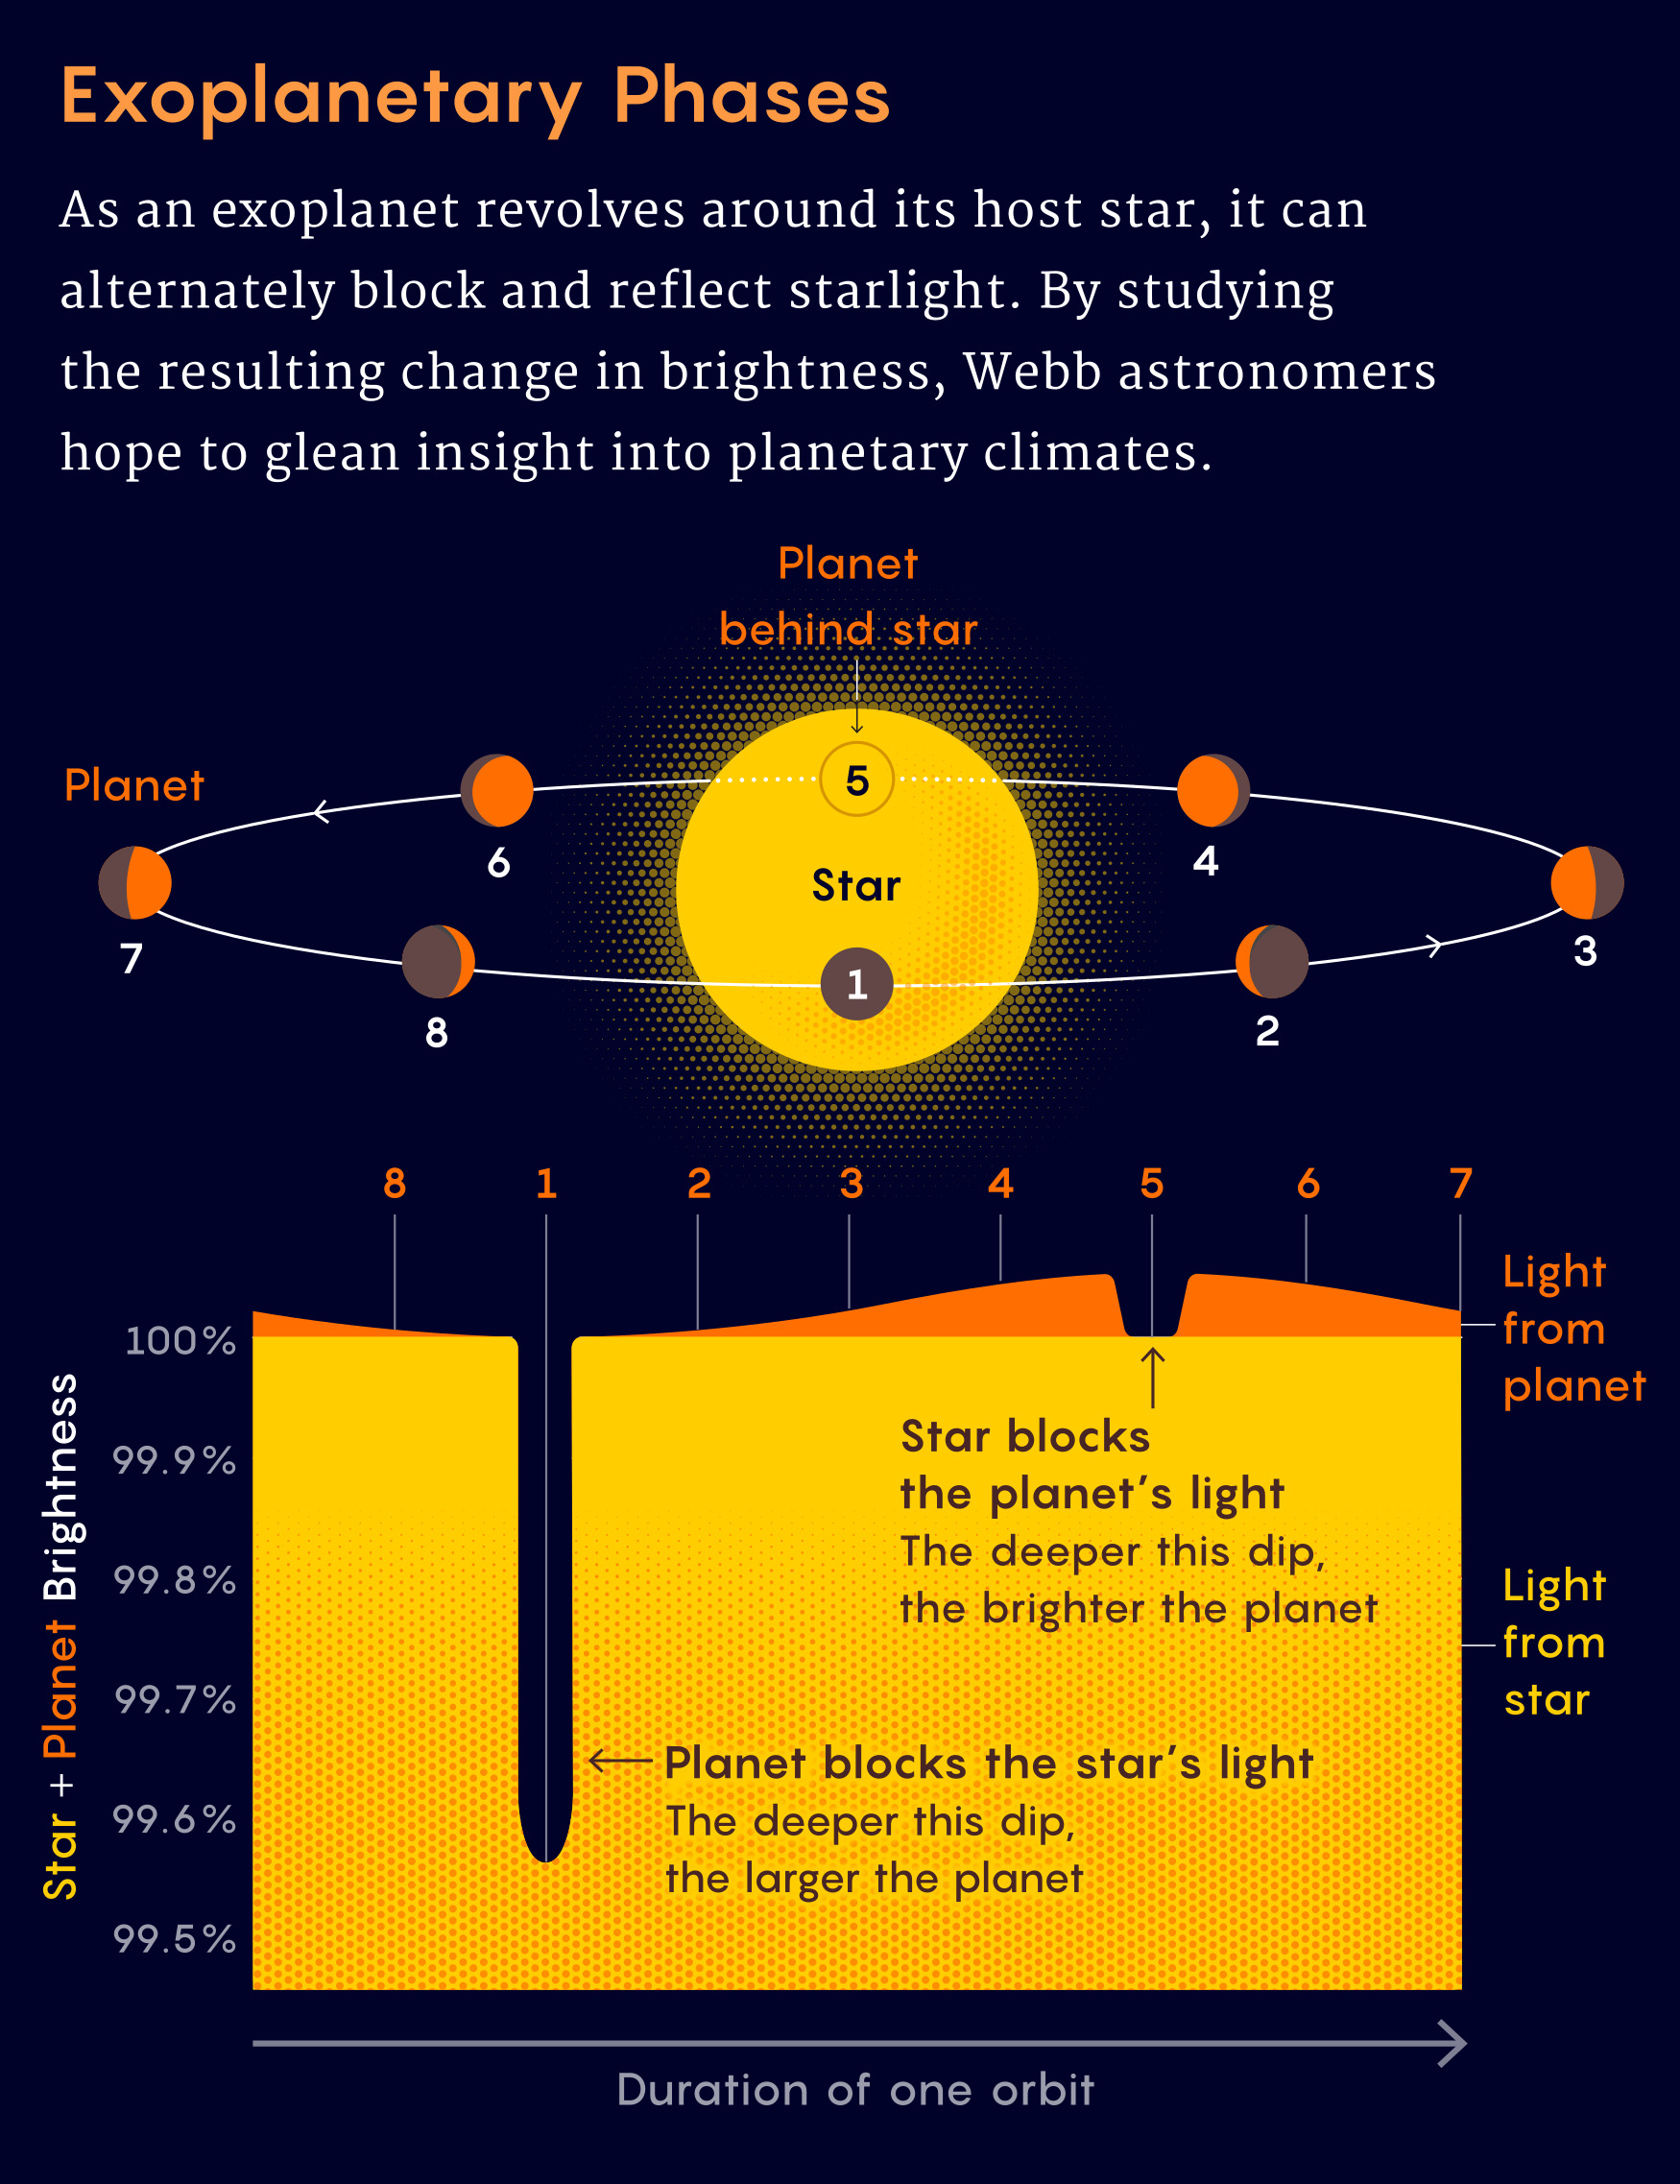 The graphic shows exoplanetary phases. As an exoplanet revolves around its host star, it can alternatively block and reflect starlight. By studying the resulting change in brightness, Webb astronomers hope to glean insight into planetary climates.